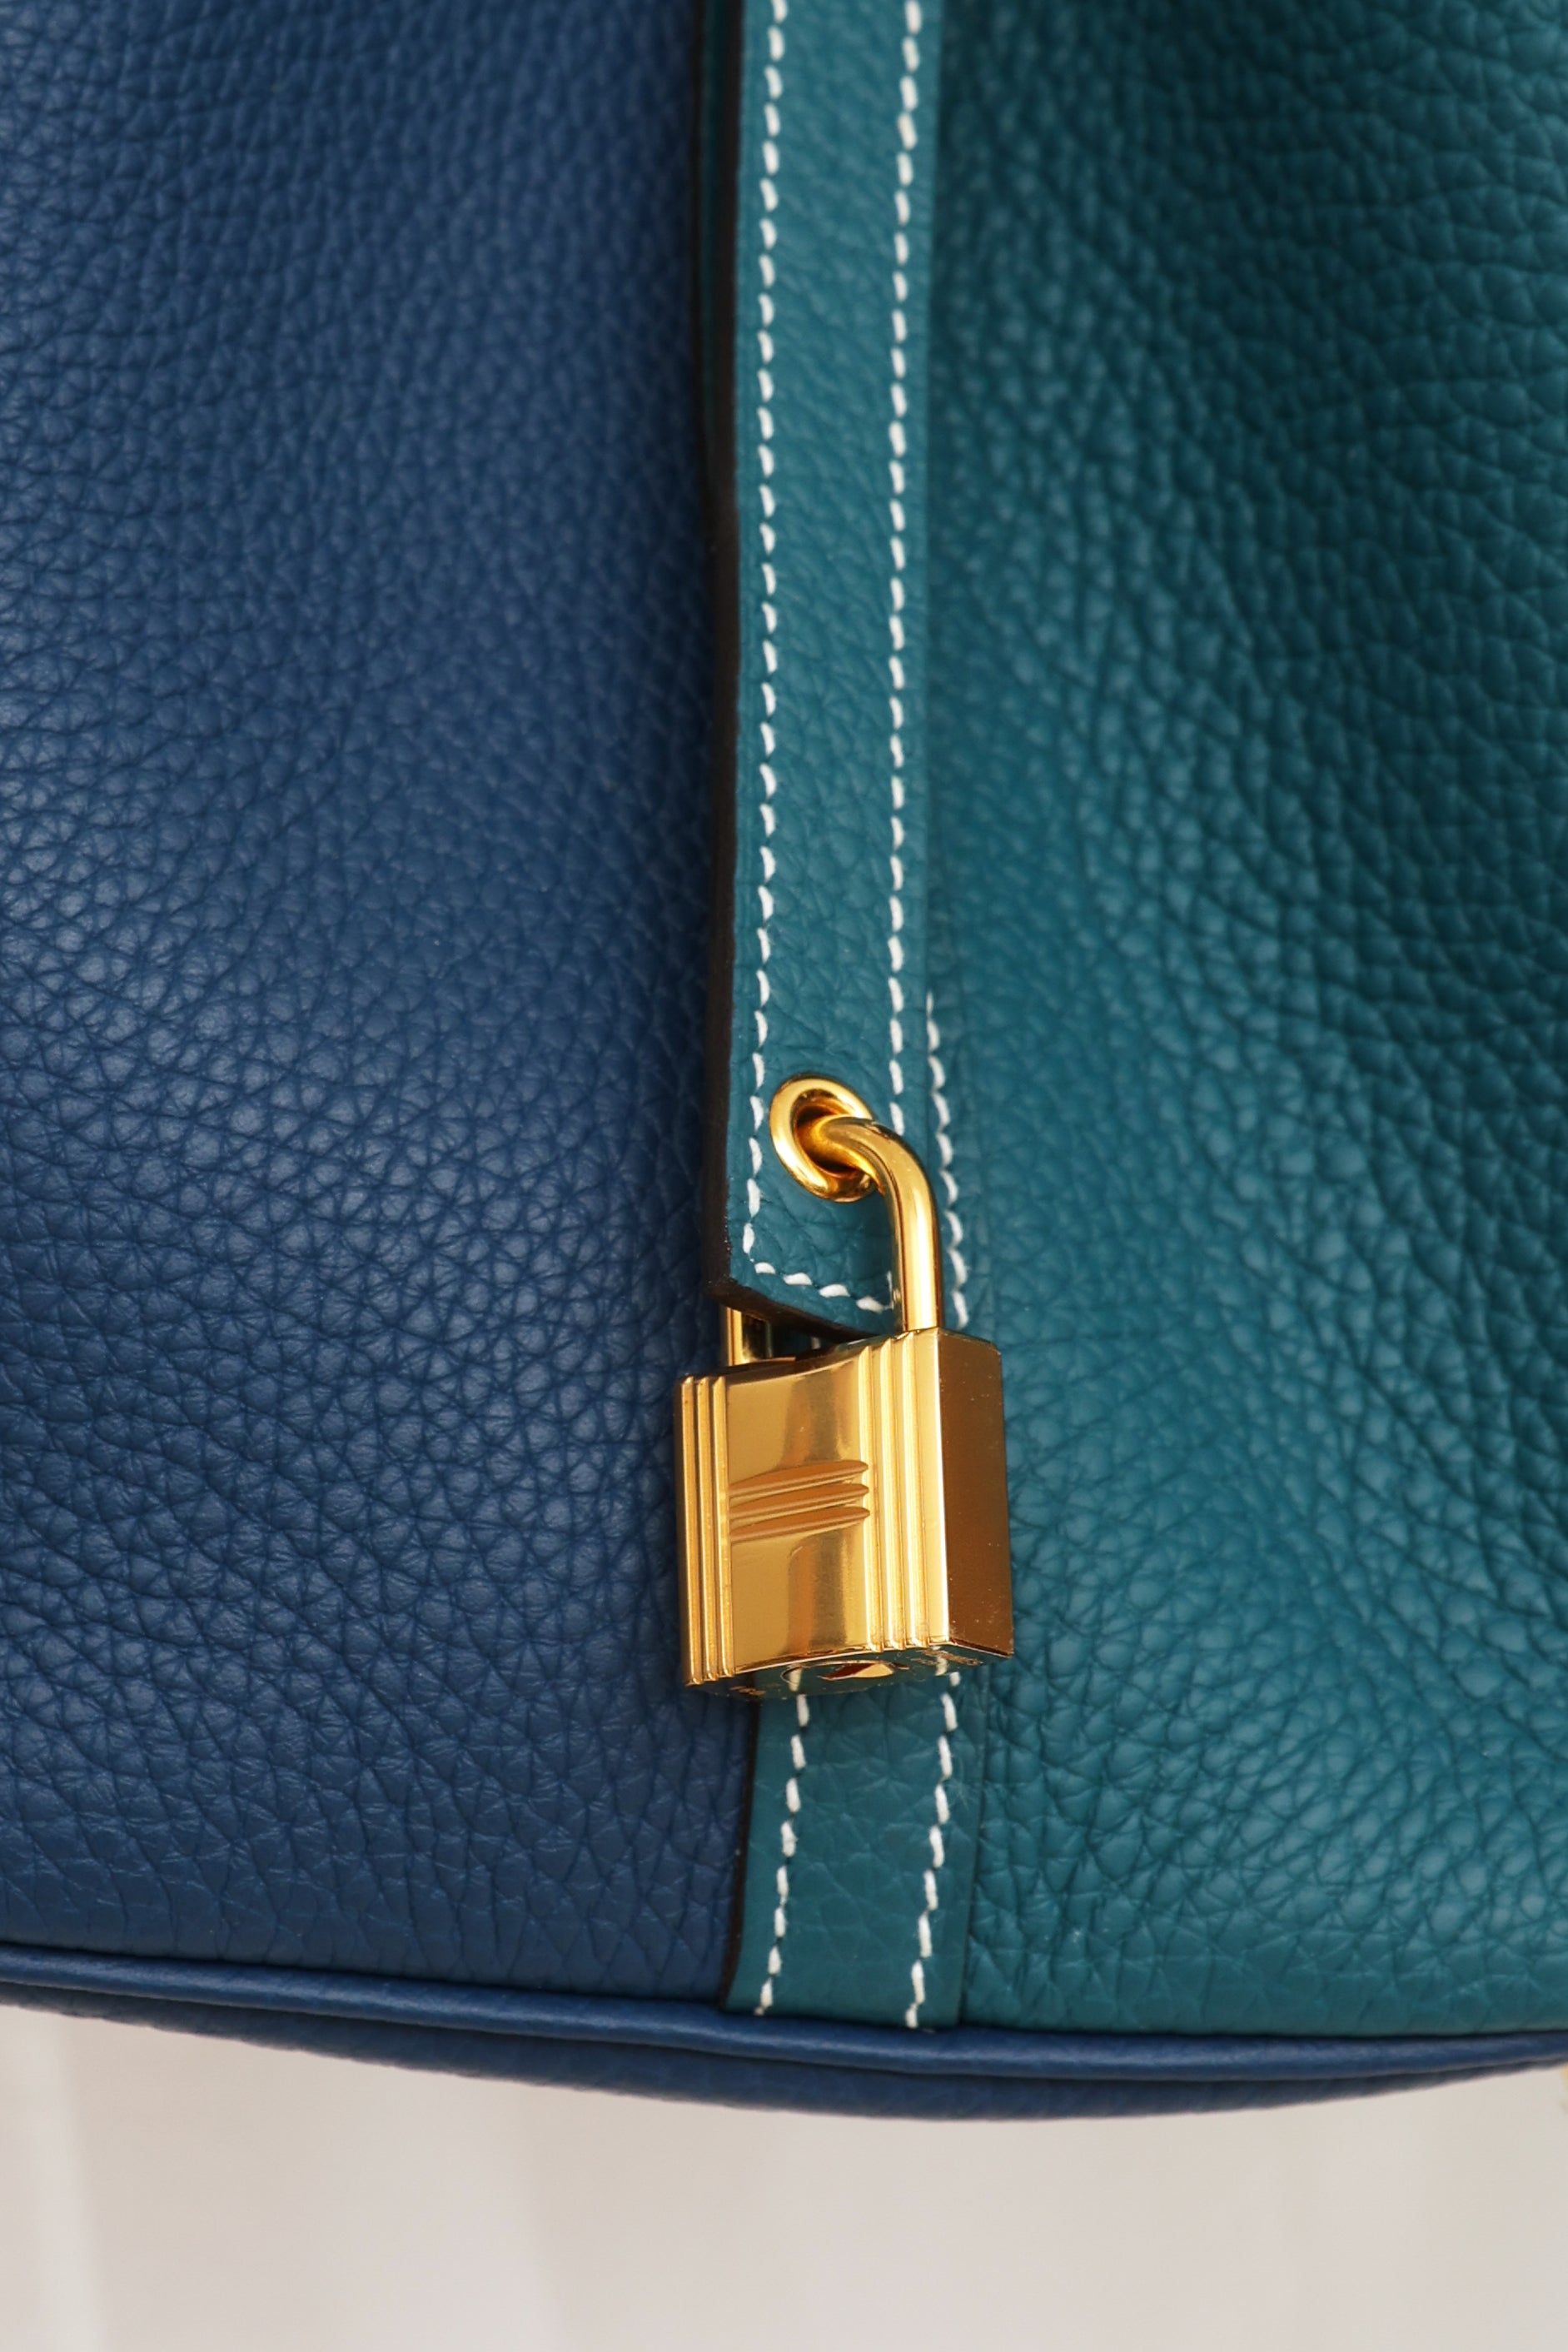 HERMÈS Picotin Lock PM handbag in Deep Blue and Vert Bosphore Clemence  leather with Gold hardware-Ginza Xiaoma – Authentic Hermès Boutique